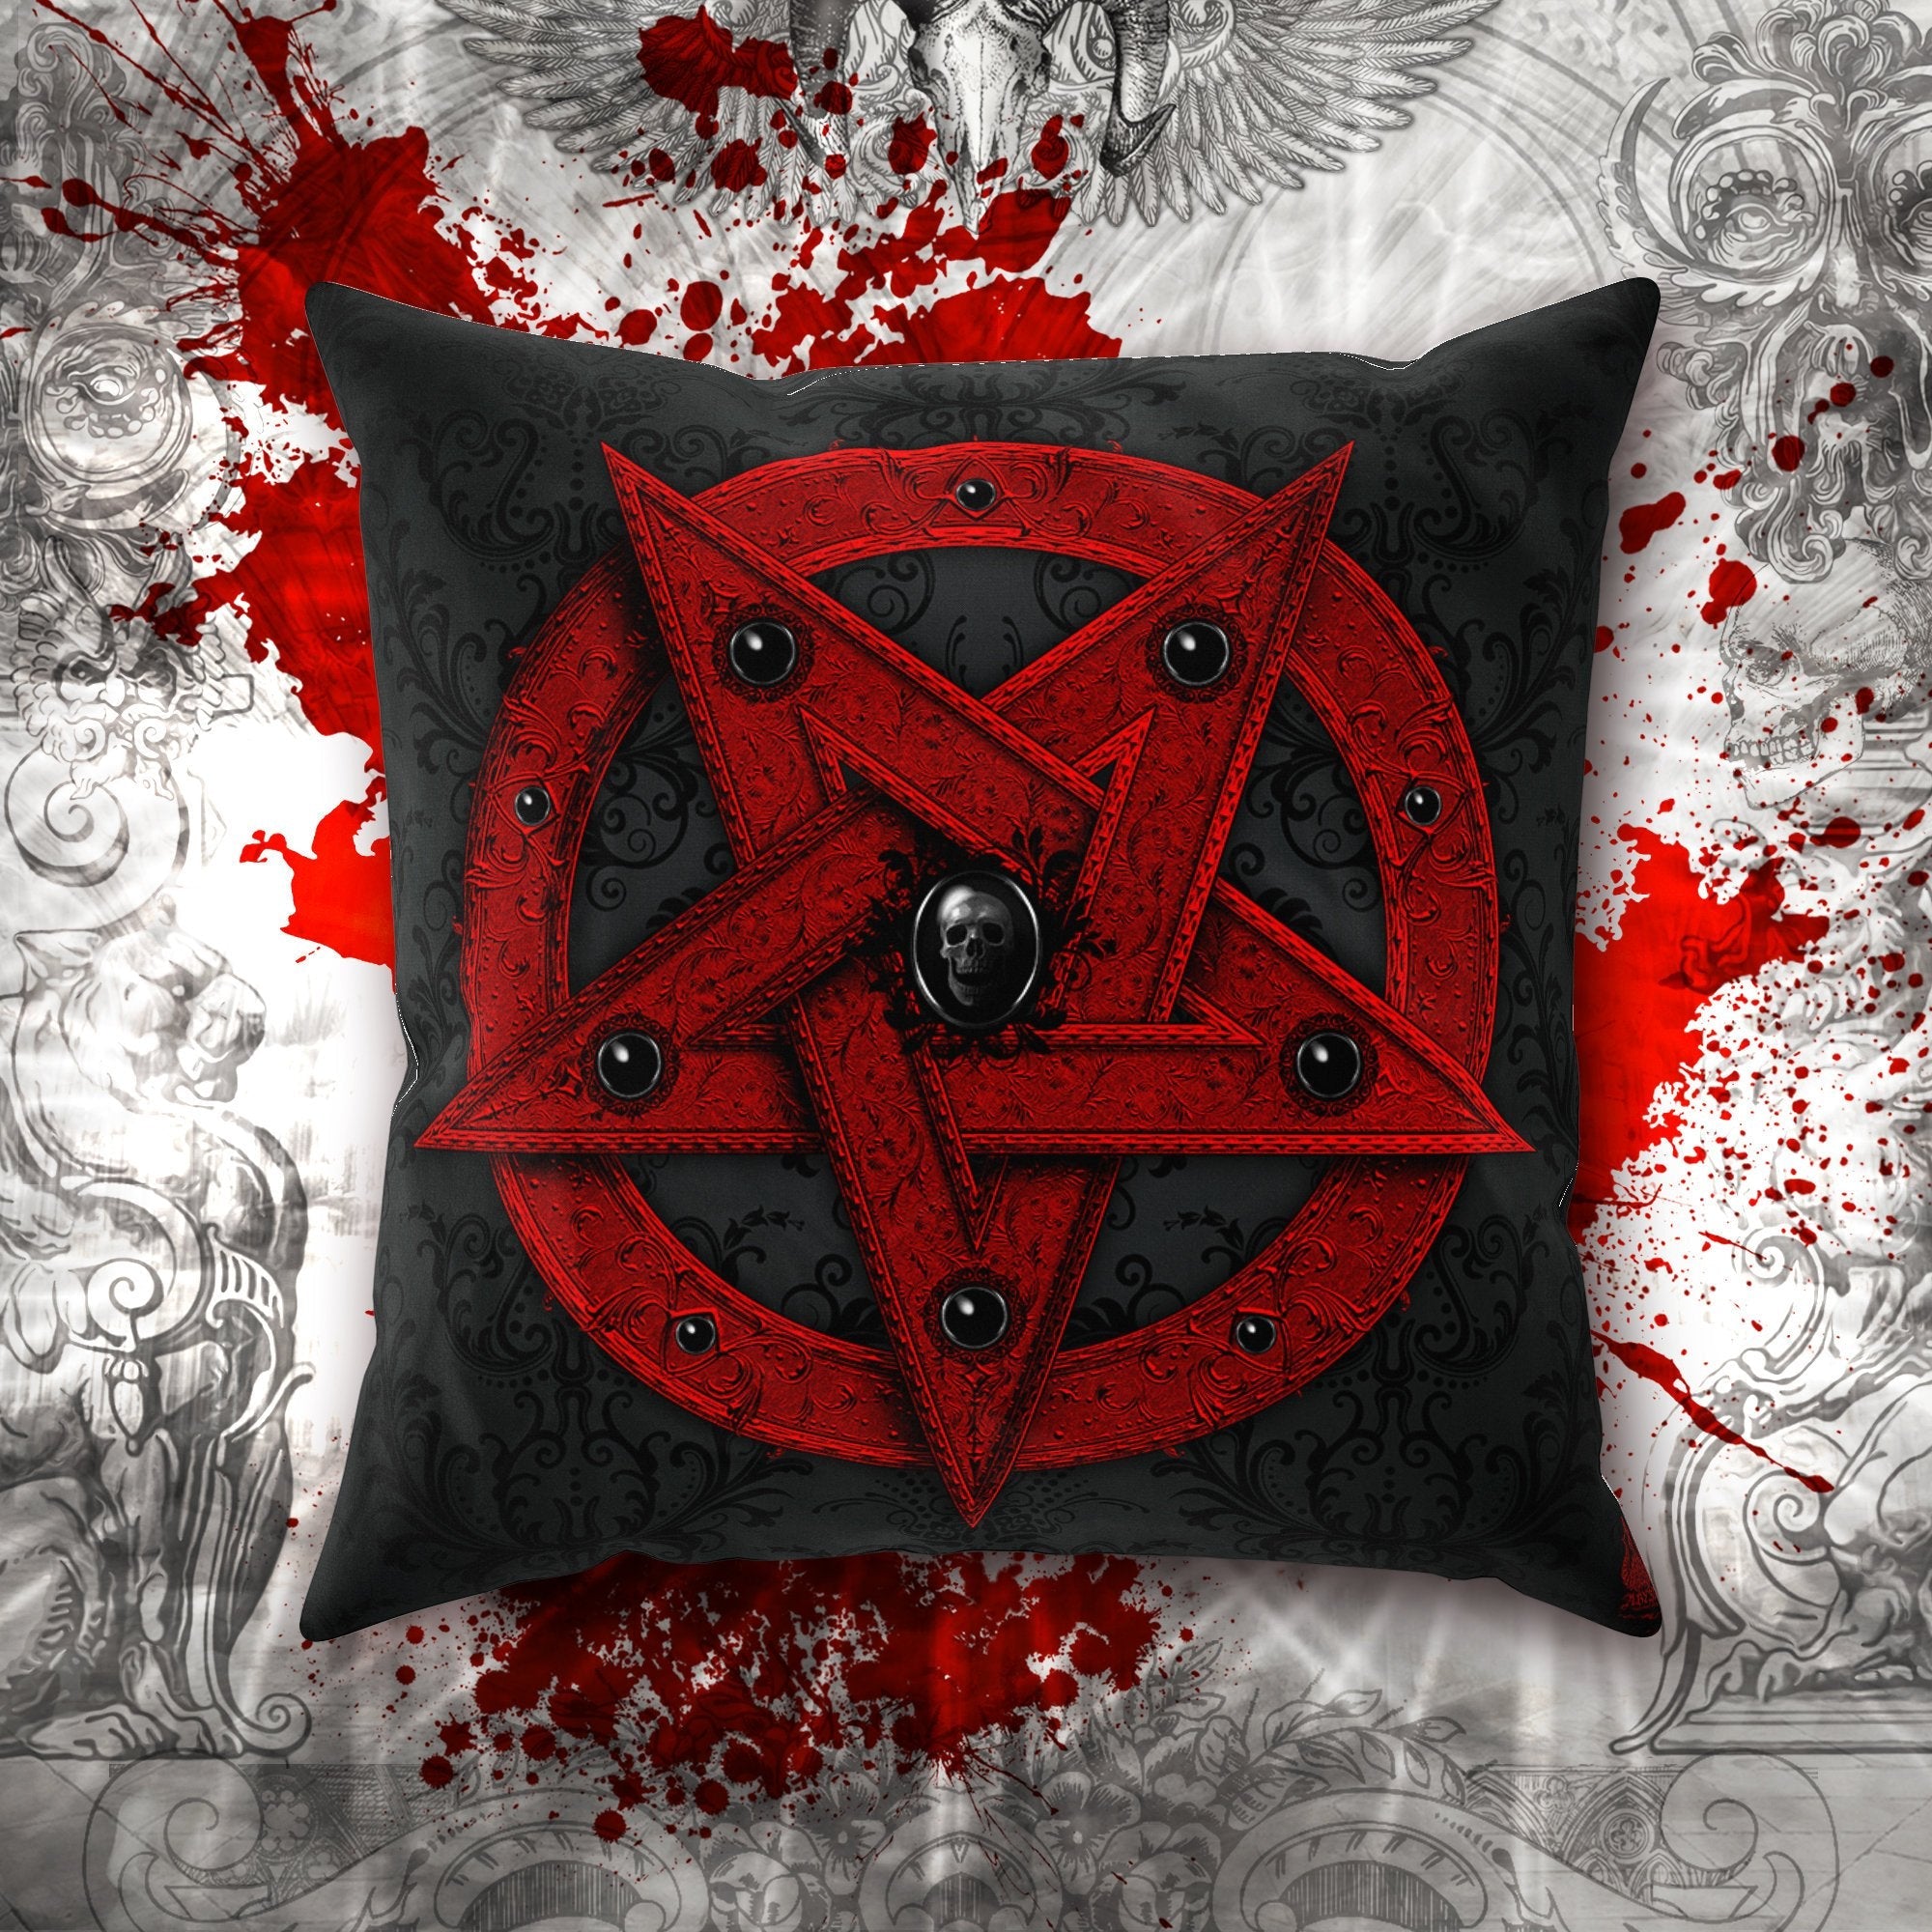 Goth Throw Pillow, Decorative Accent Pillow, Square Cushion Cover, Satanic  and Dark Room Decor, Alternative Home - Gothic Hell, Merry